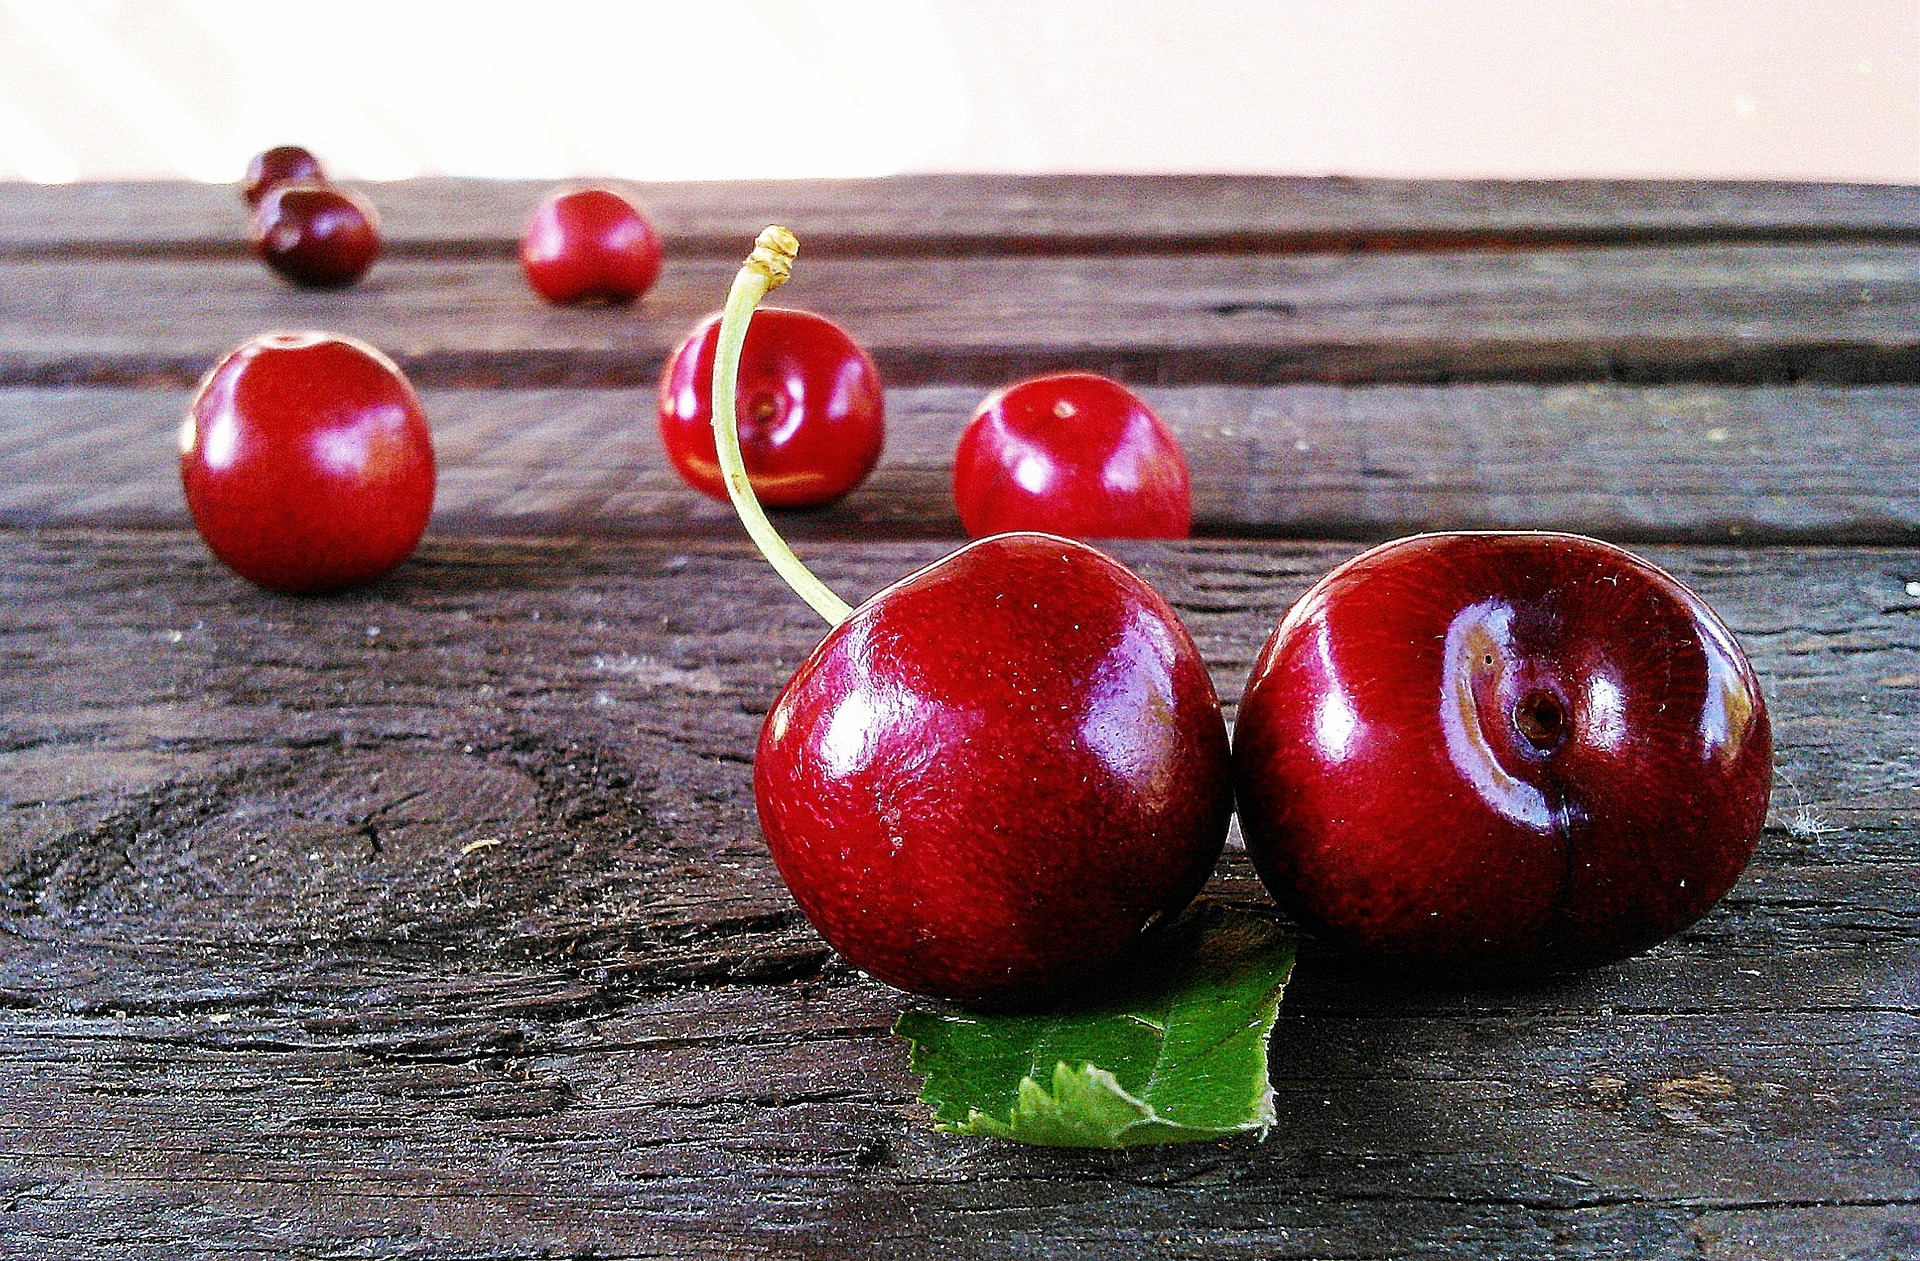 Tart cherries contain flavonoids that are metabolised to phenolic acids in the gut. These phenolic acids can then be absorbed. Once in the circulation, phenolic acids may act as antioxidants, and this may produce anti-inflammatory and blood pressure lowering effects. Other fruits and vegetables rich in flavonoids may also have a similar effect on blood pressure. 